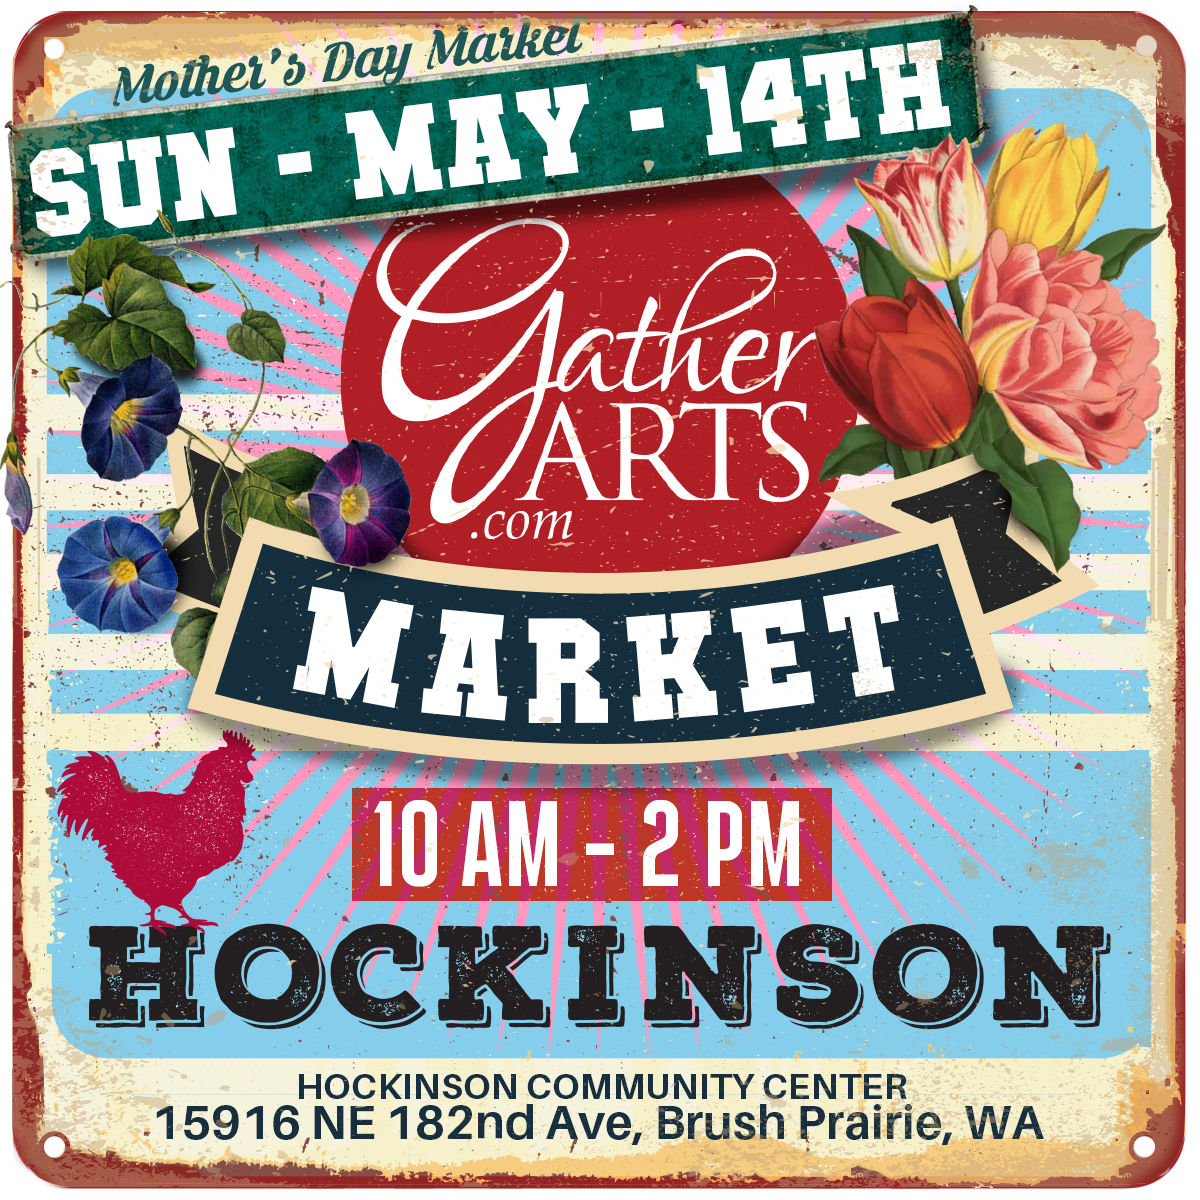 Gather Arts Outdoor Market – Events